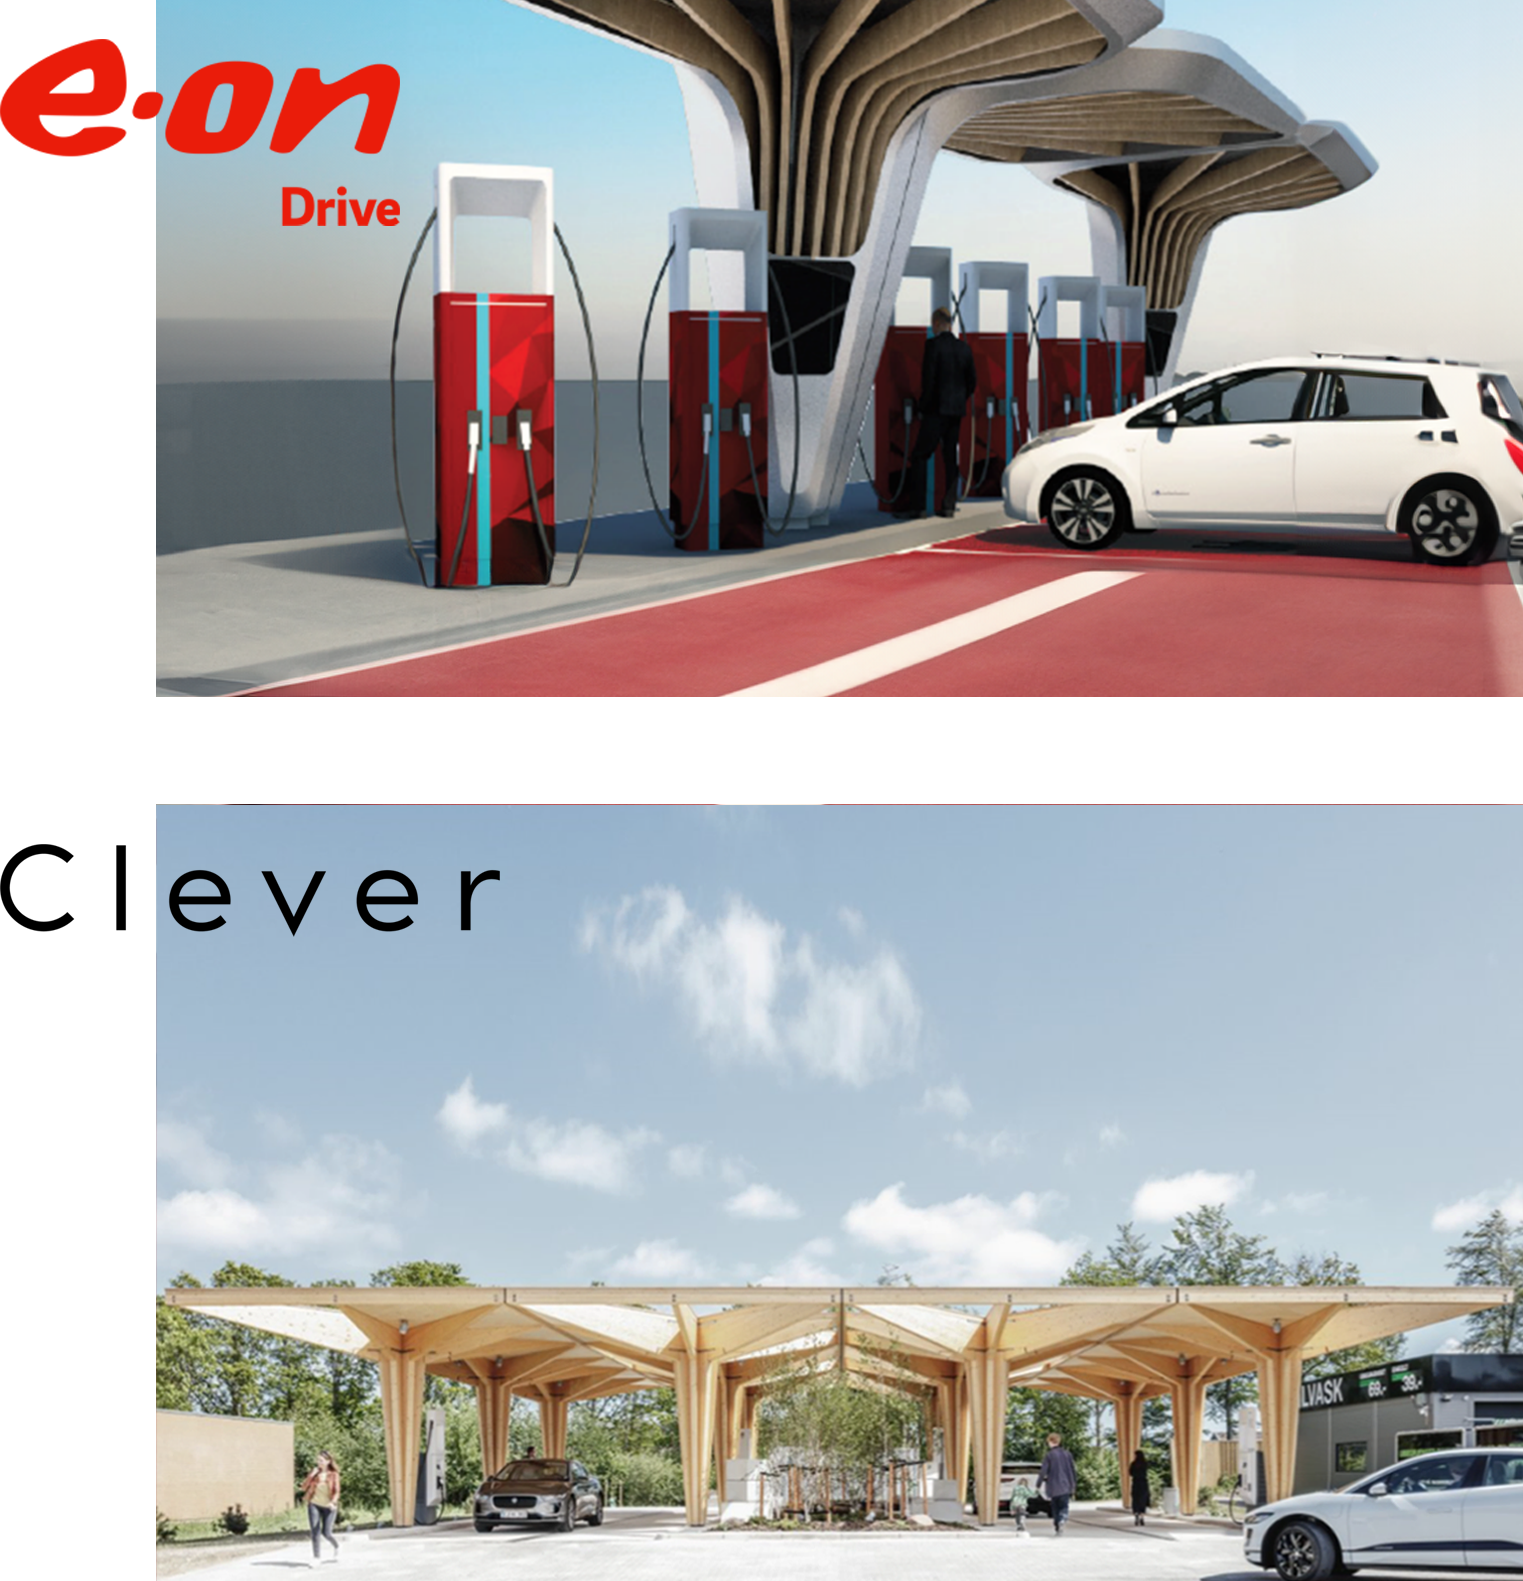 E.on + Clever